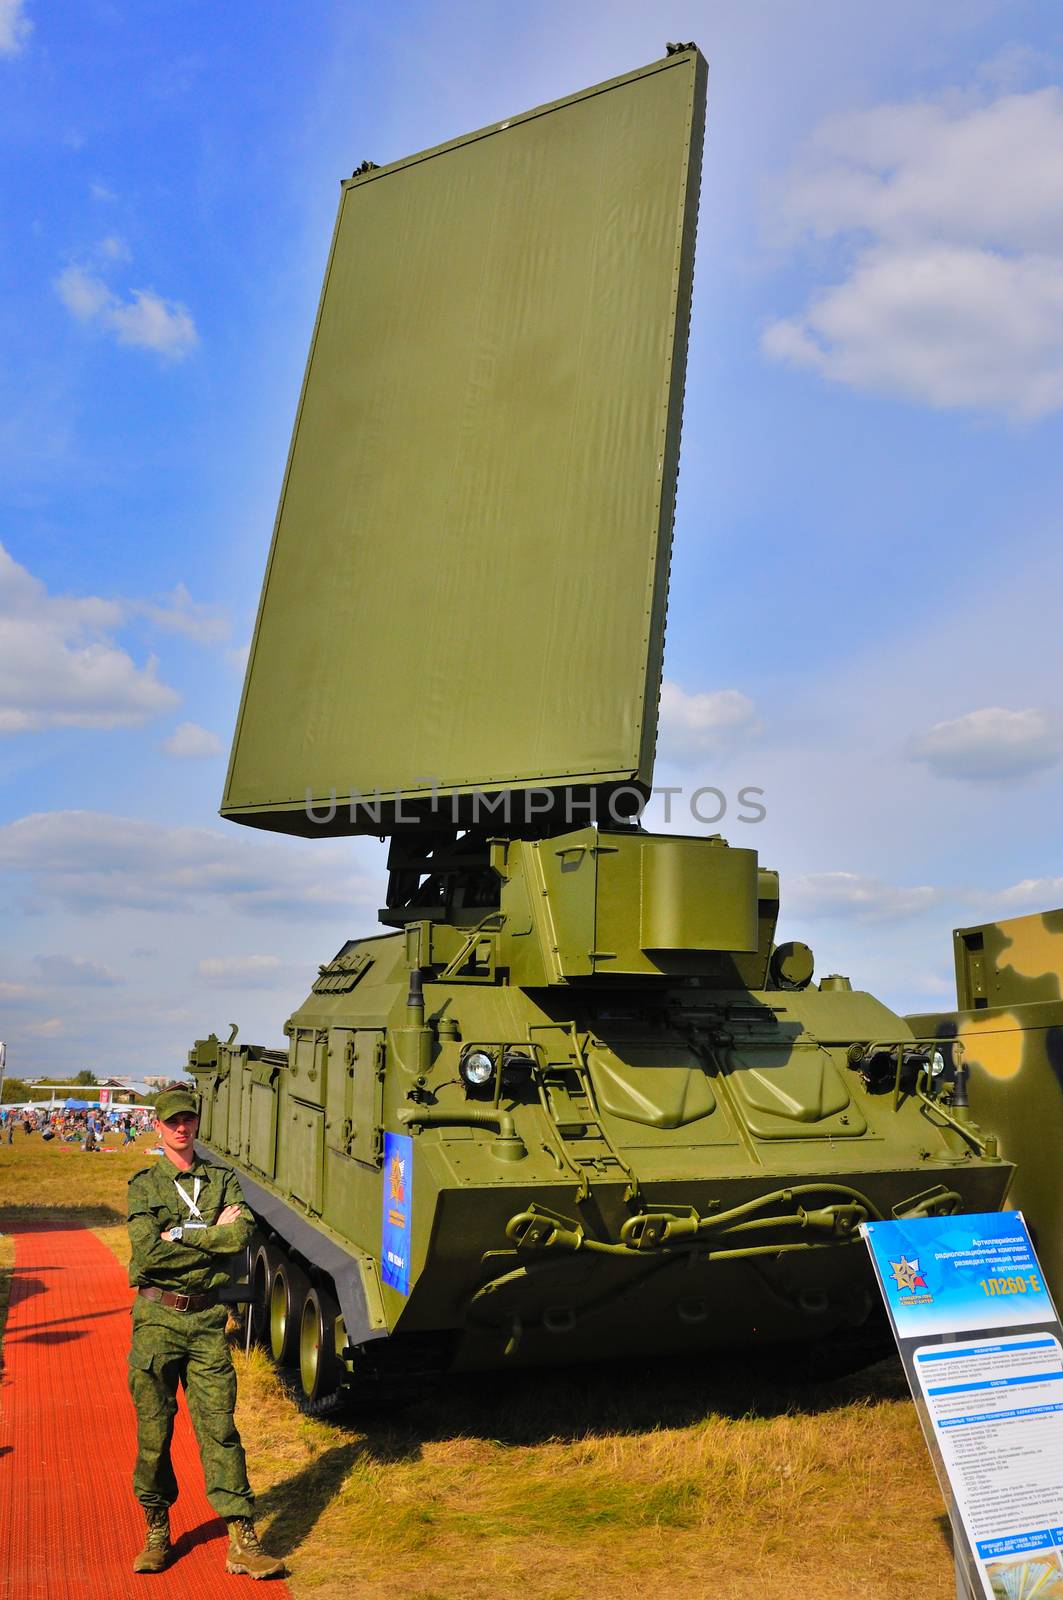 MOSCOW, RUSSIA - AUG 2015: Station target detection anti-aircraf by Eagle2308